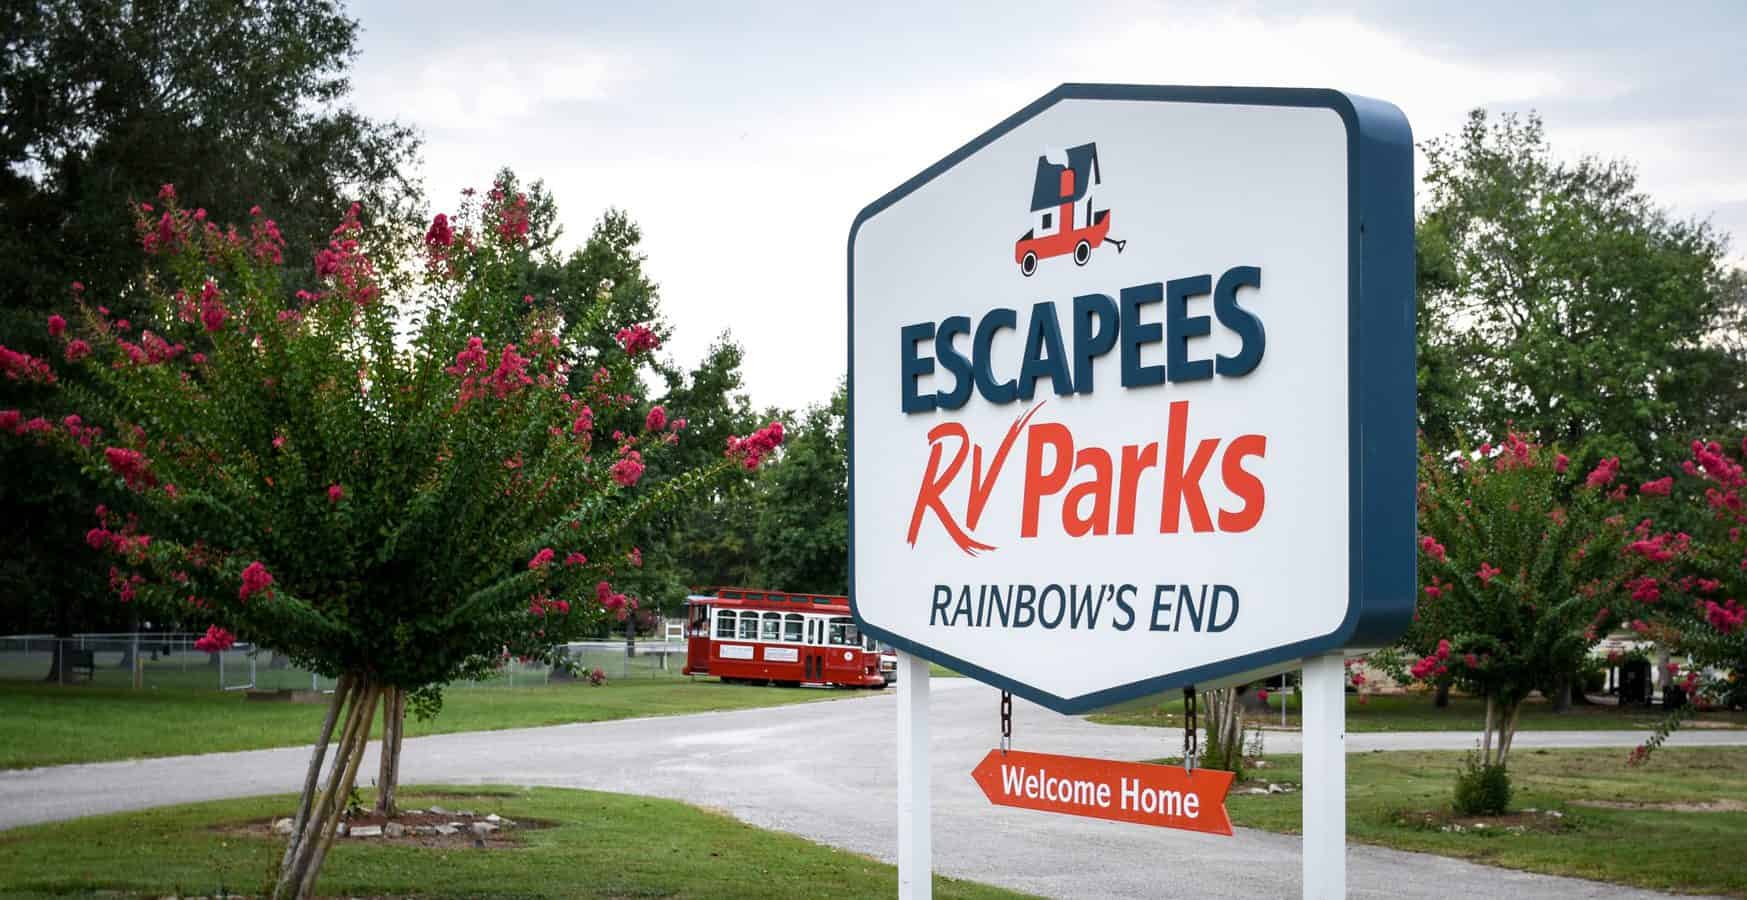 Welcome sign at an Escapees RV Park